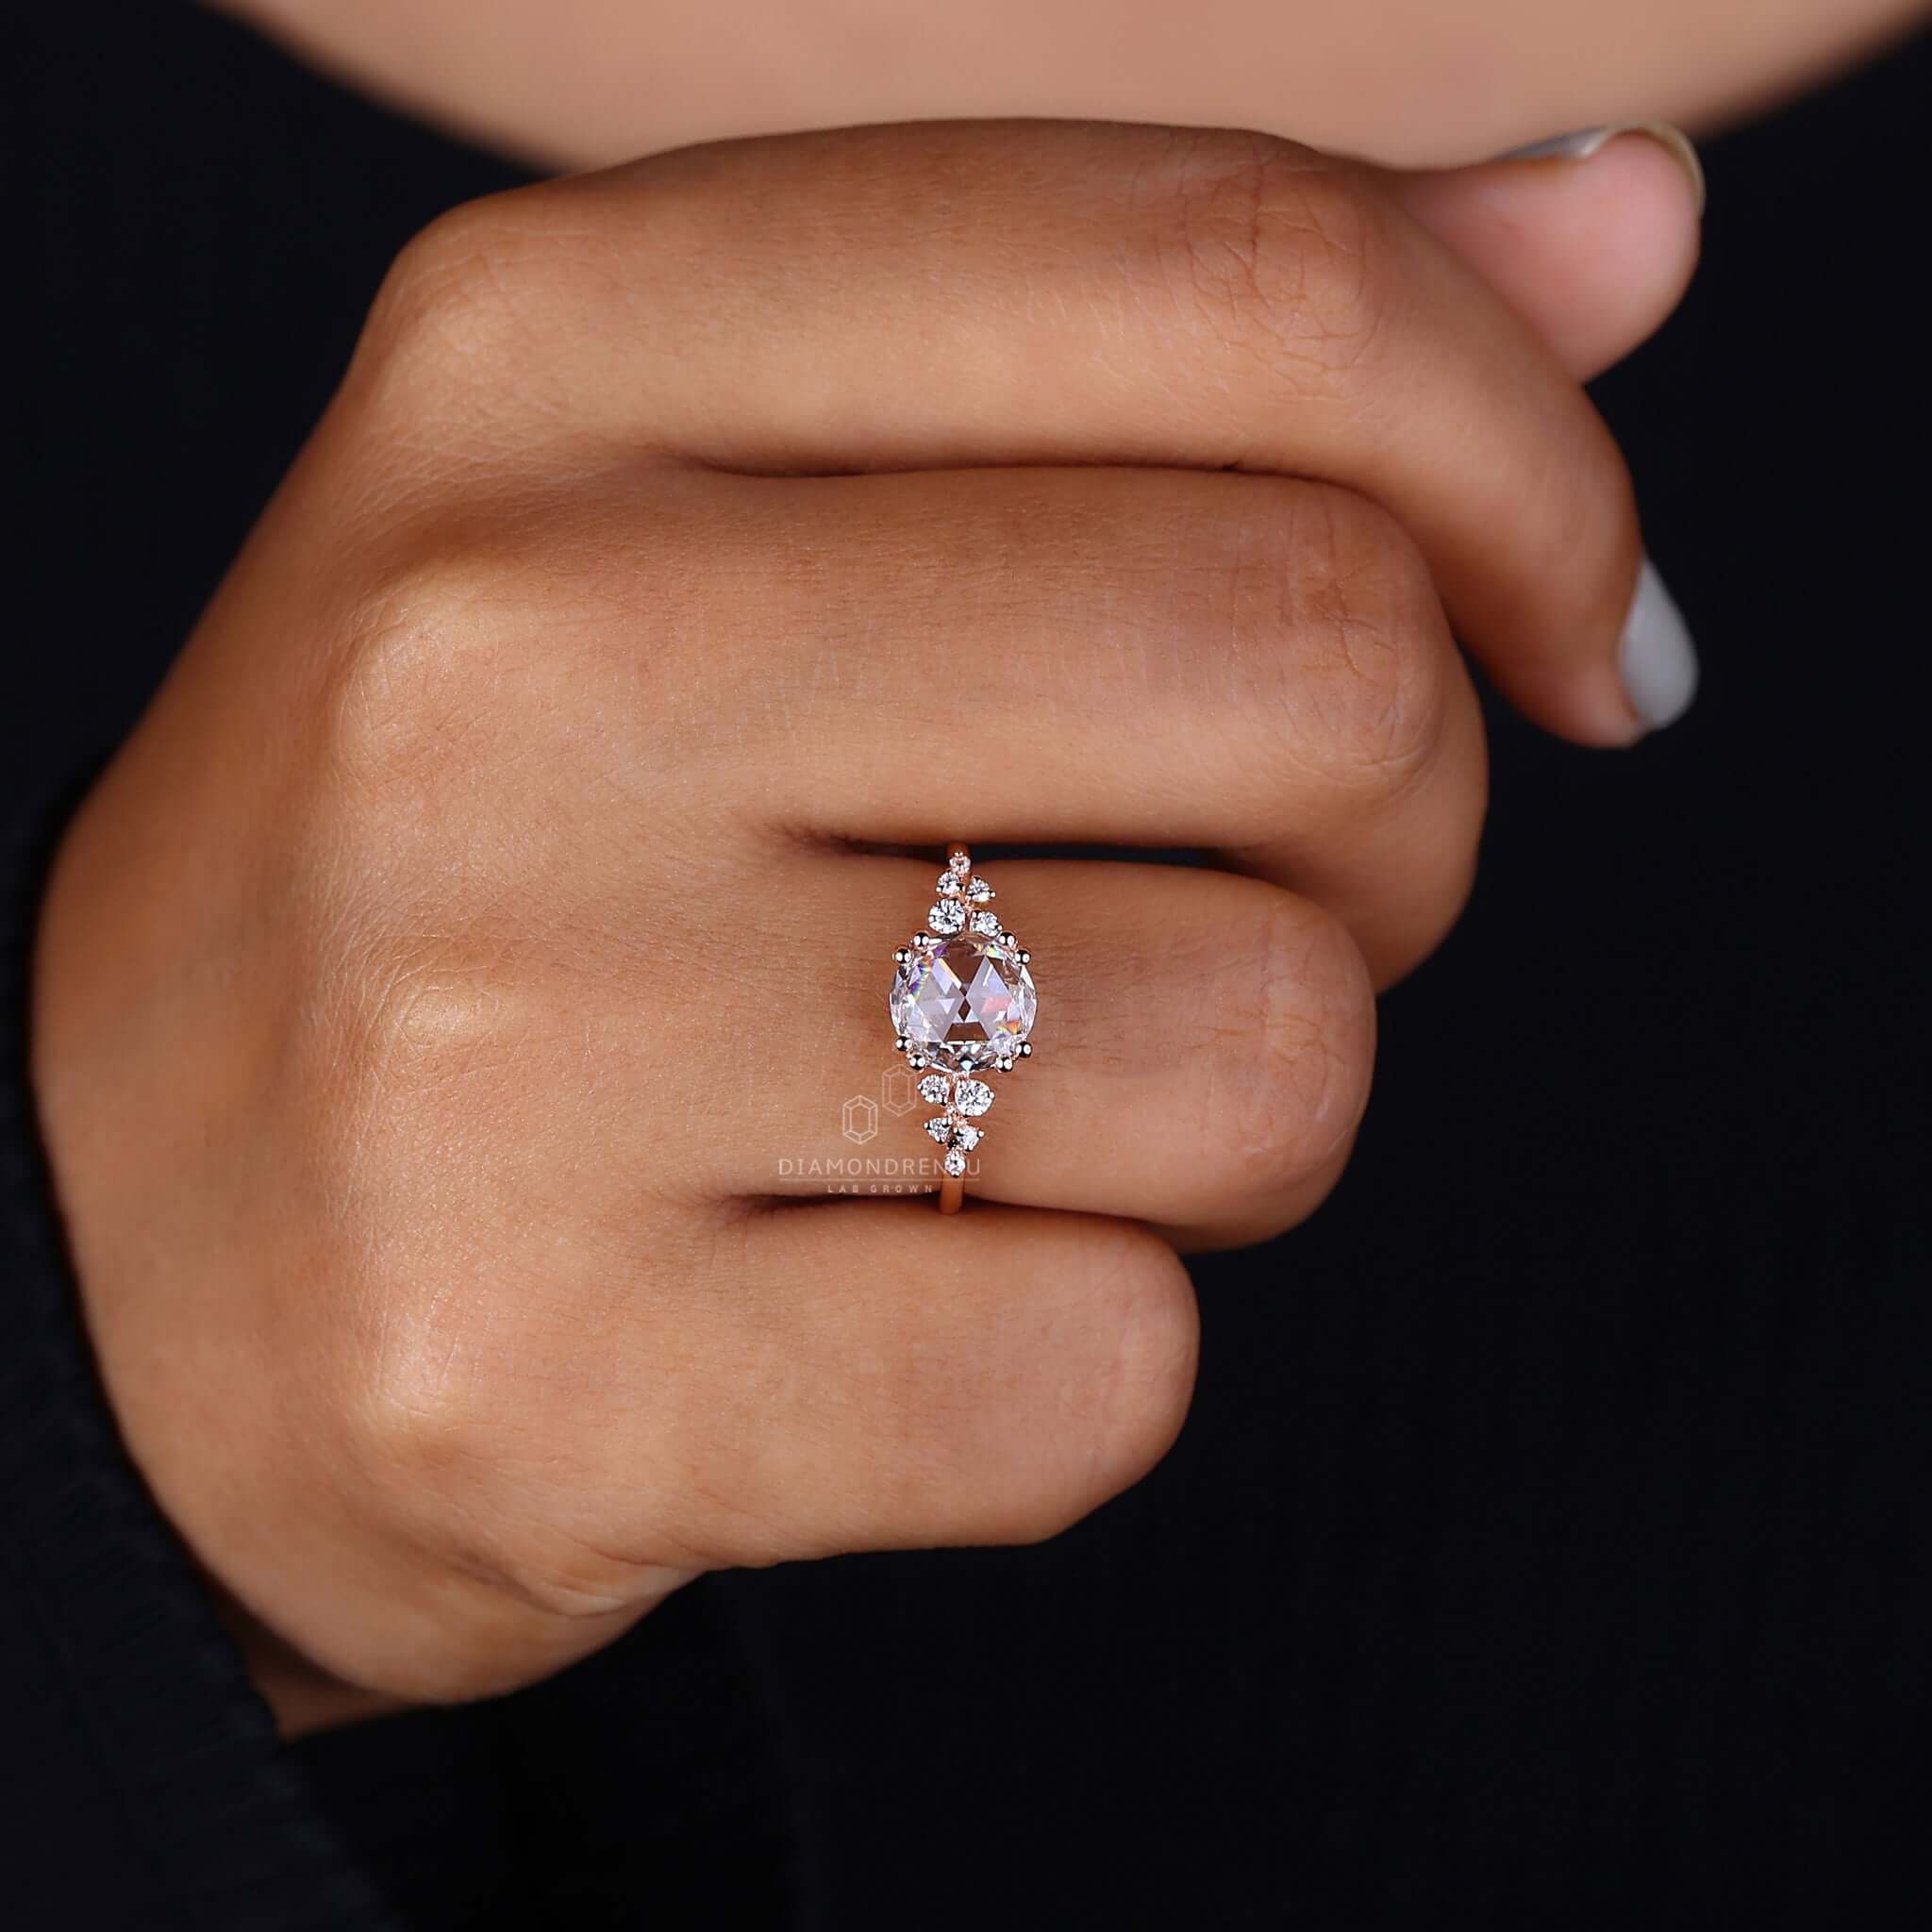 Gorgeous rose cut diamond engagement ring on a hand, capturing the moment of a dreamy proposal